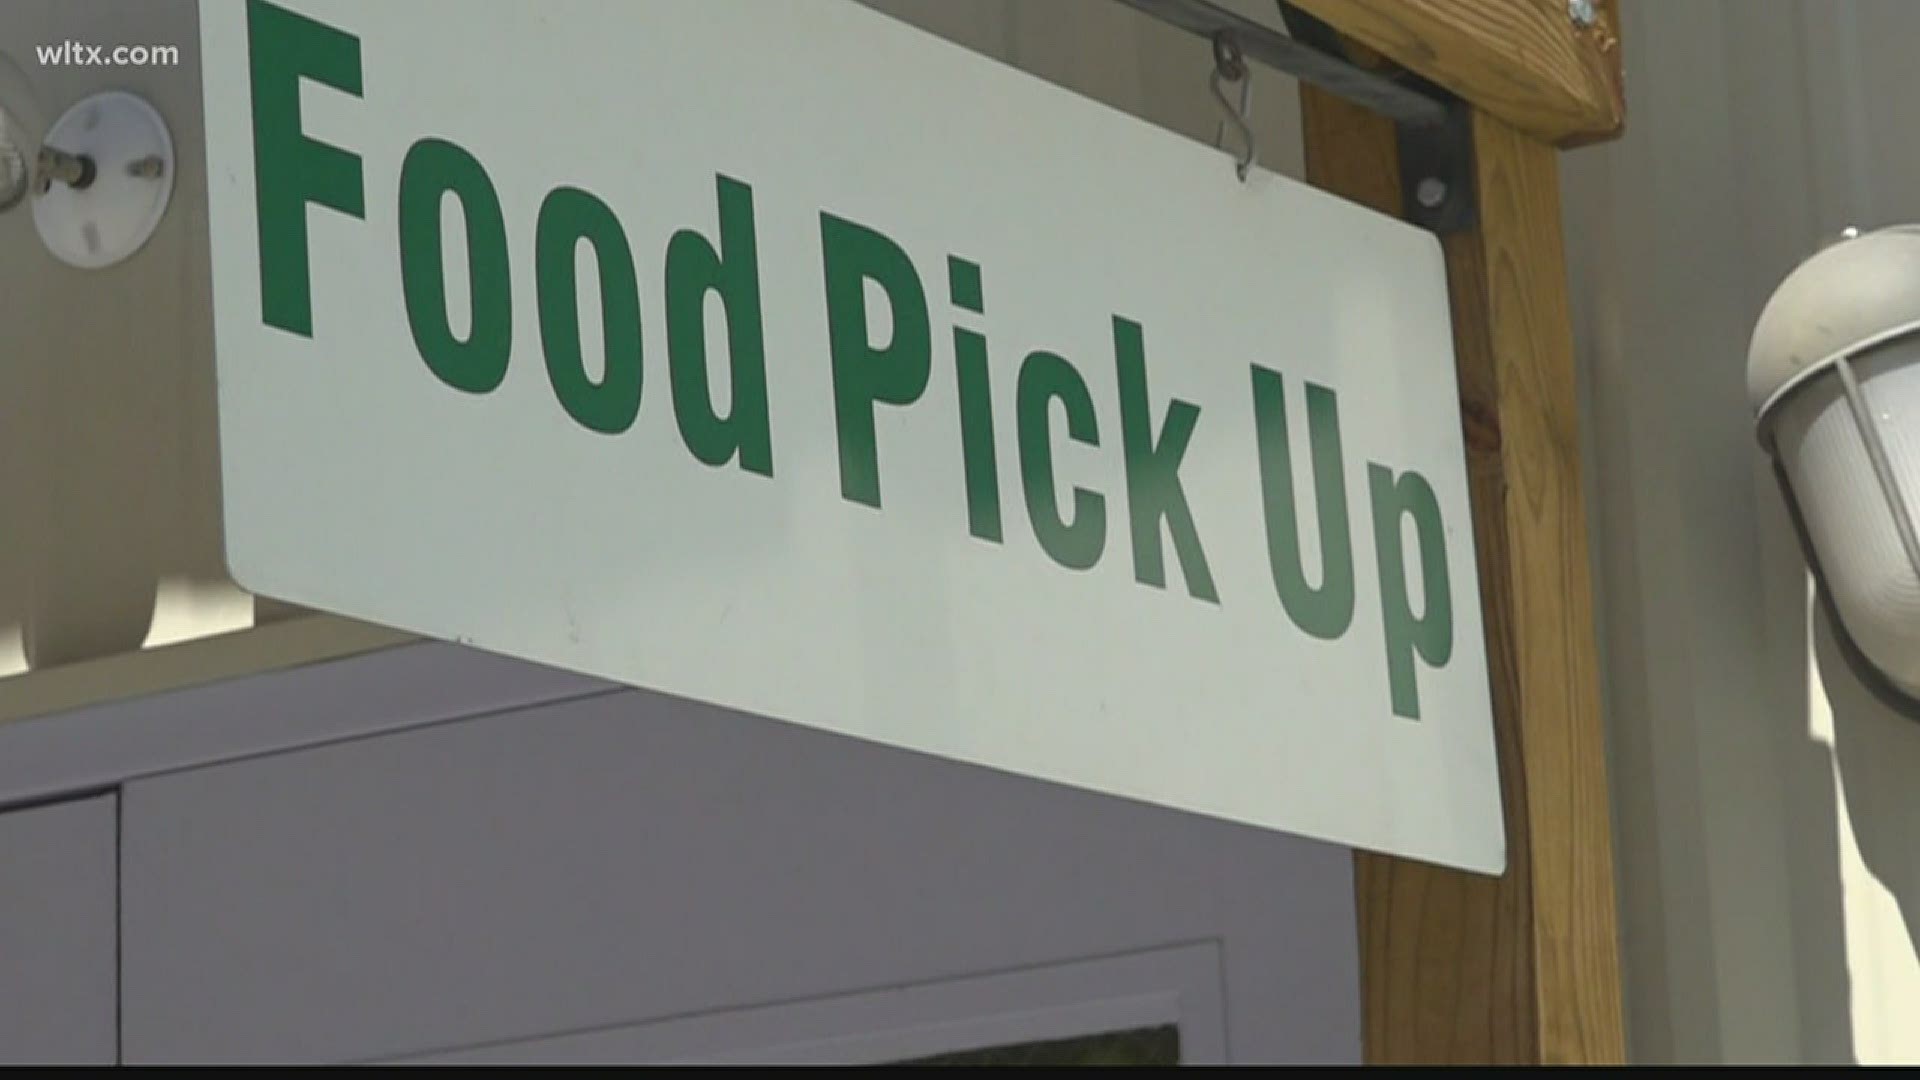 Mission Lexington typically allows folks to pick up food once every six months.  They've now changed their policy to once per month.